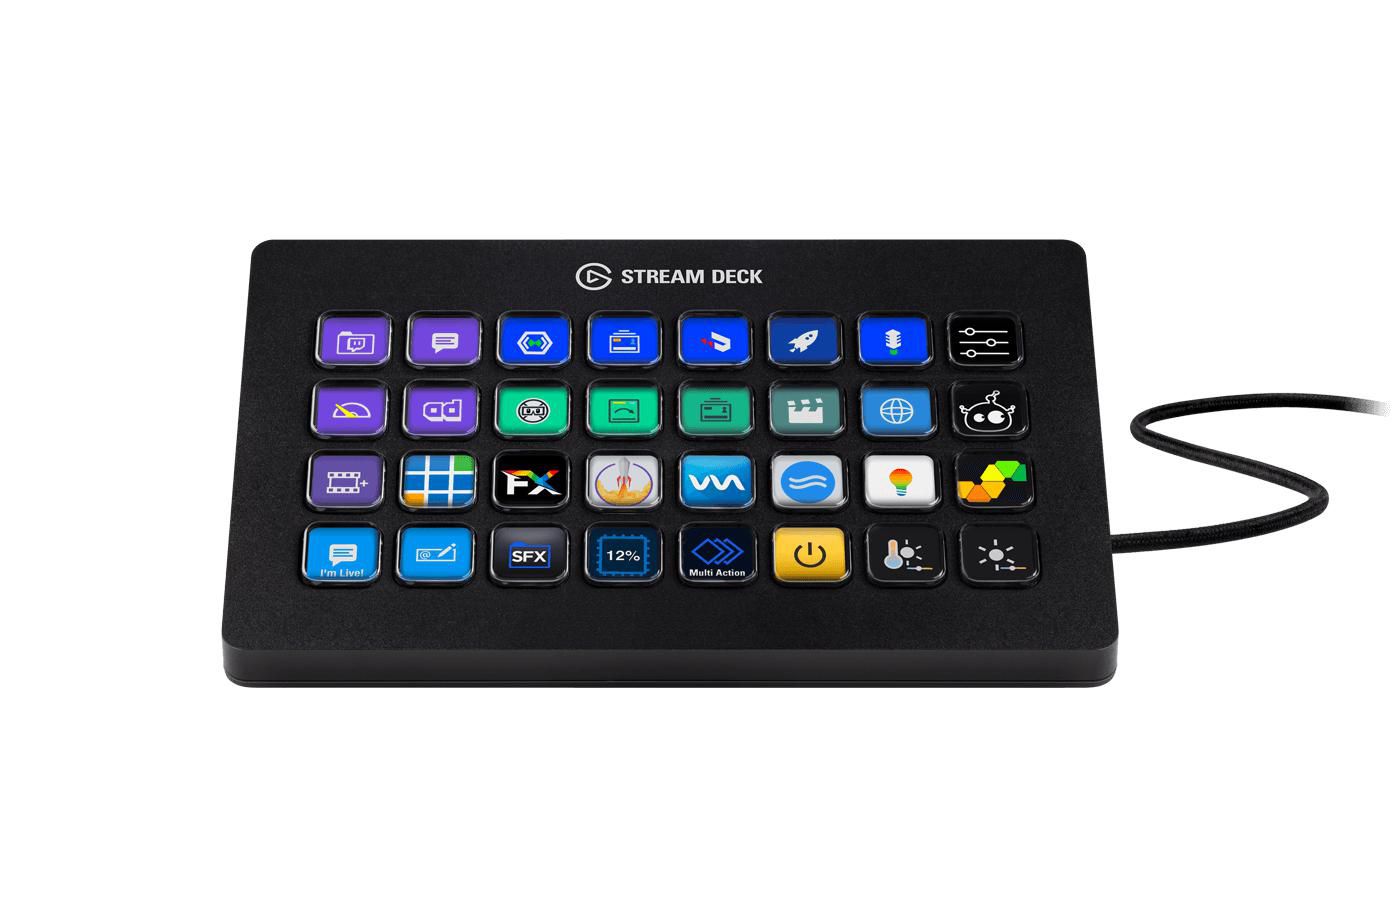 Elgato Stream Deck + White, Audio Mixer, Production Console and Studio  Controller for Content Creators, Streaming, Gaming, with Customizable Touch